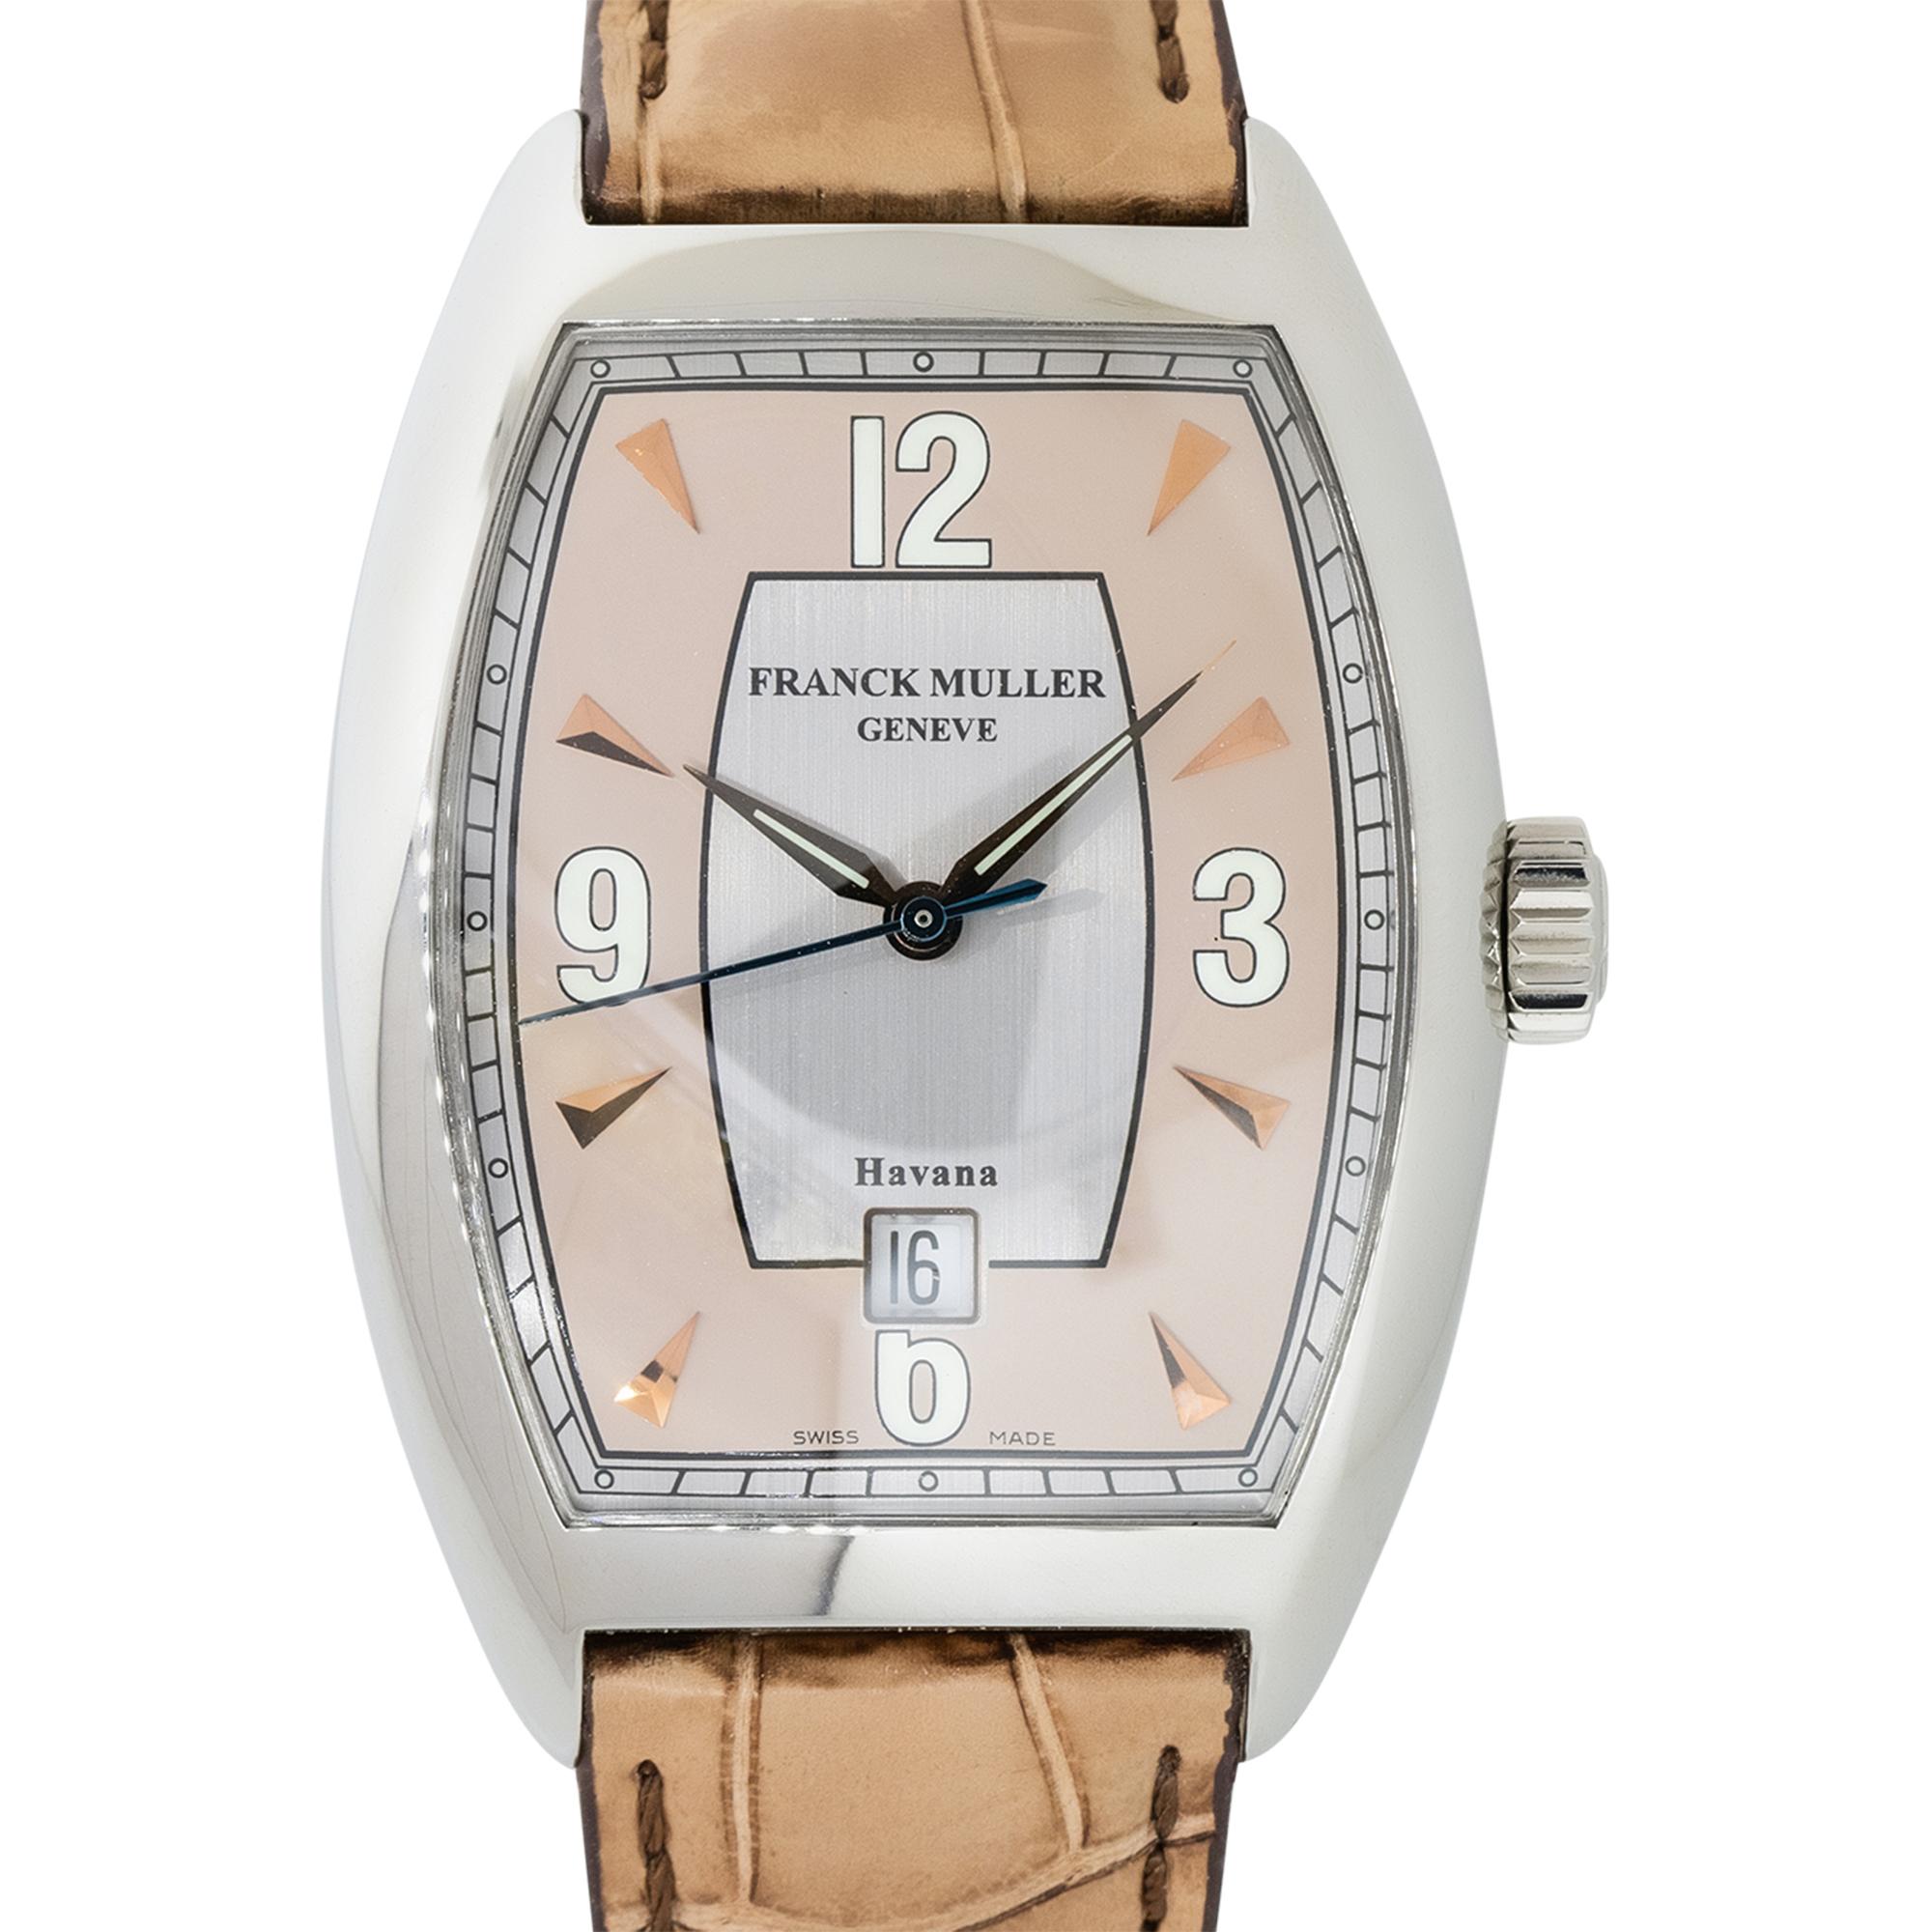 Brand: Franck Muller
MPN: 7881
Model: Havana Cintree Curvex B SC DT HV
Case Material: Stainless Steel
Case Diameter: 36 mm
Crystal: Scratch resistant sapphire
Bezel: Stainless Steel
Dial: Rose and silver dial with white arabic numerals. Date can be